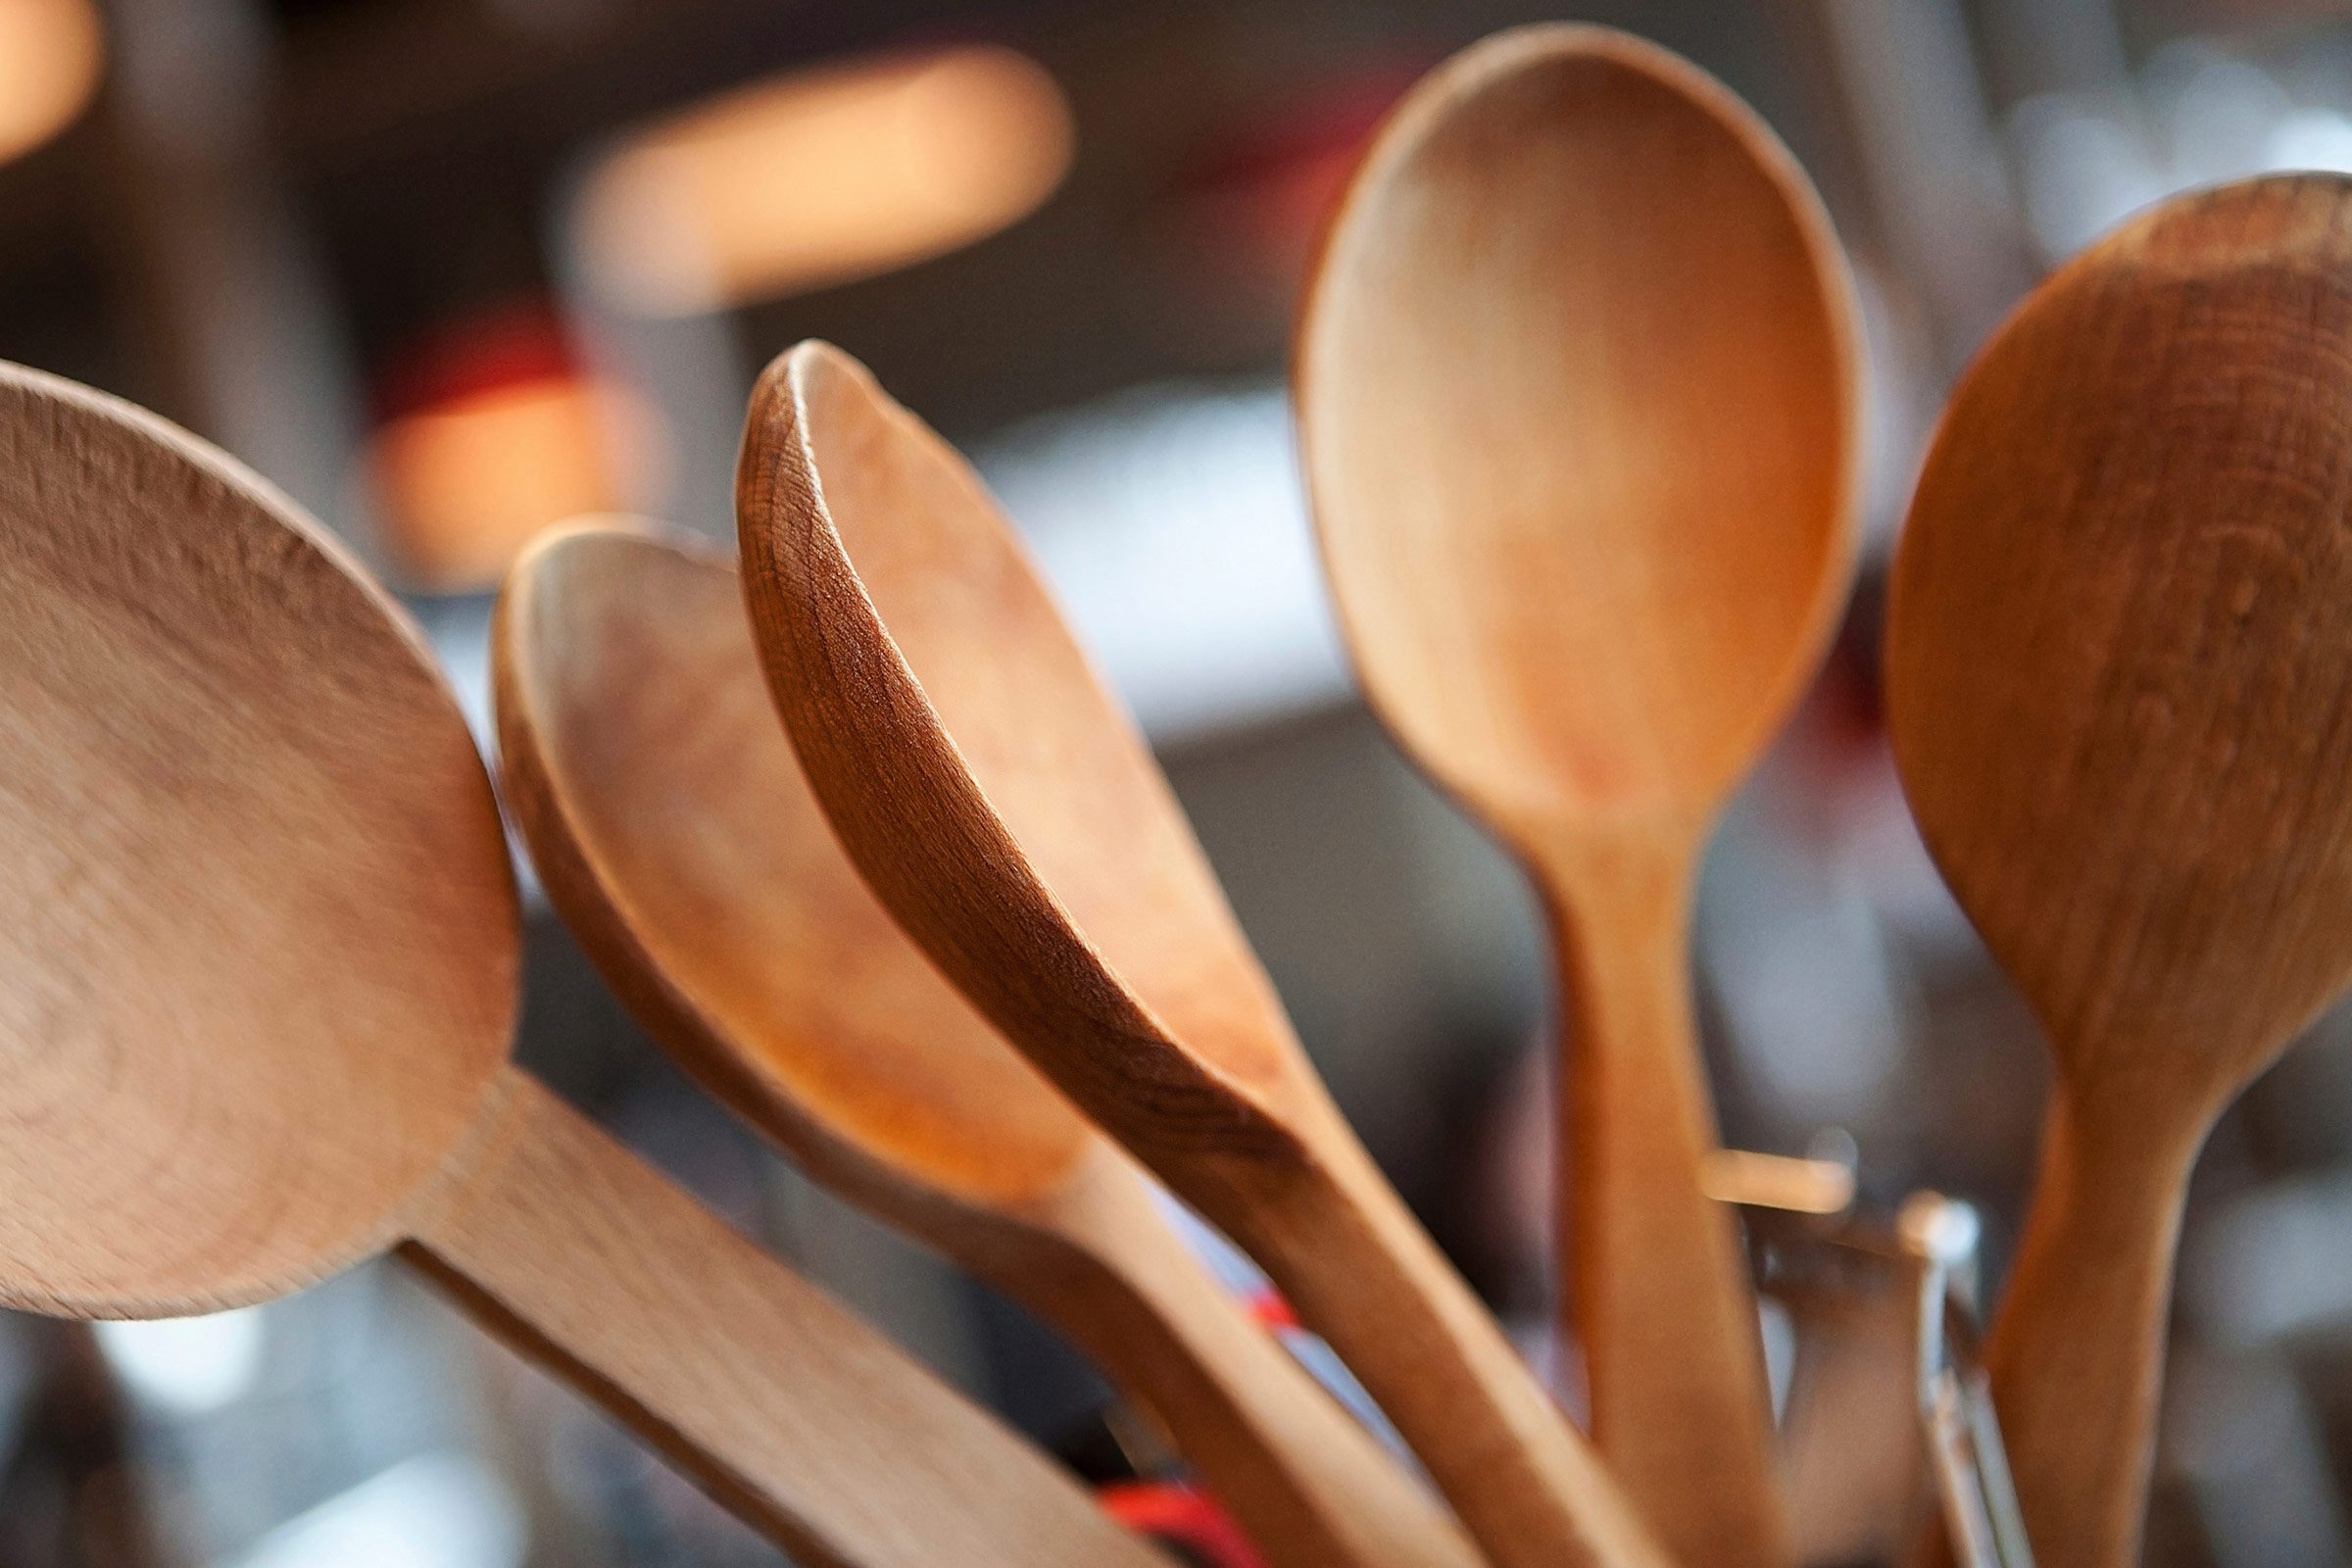 How to Clean a Smelly Wooden Spoon